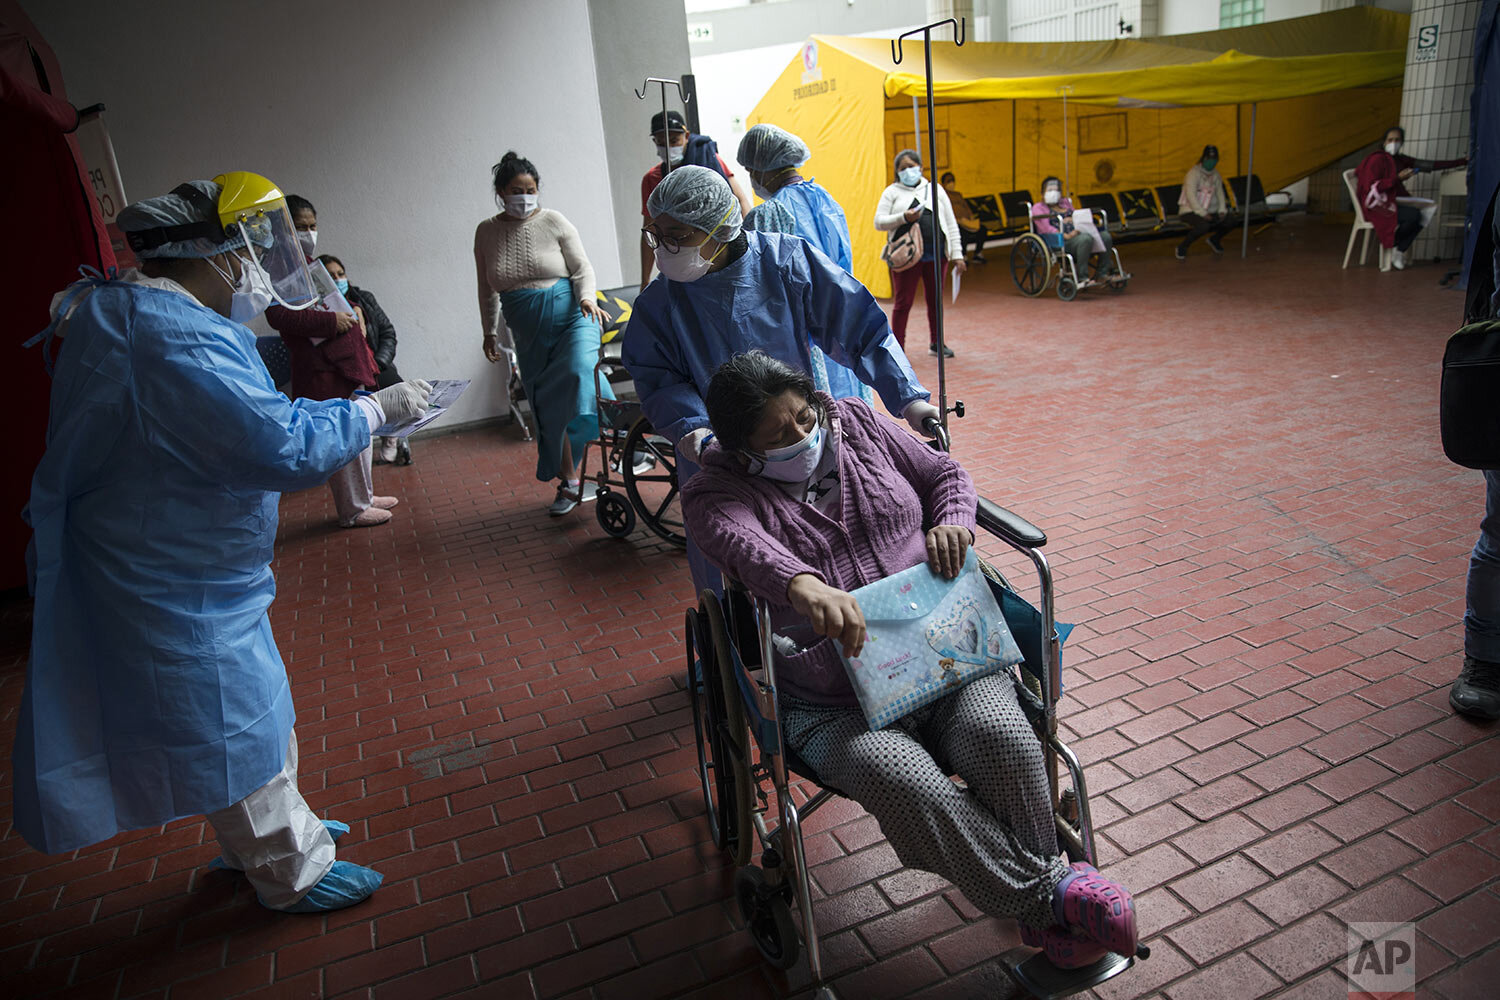  A nurse receives an expectant mother at an entry checkpoint who must be tested for COVID-19 before she can be admitted, outside the emergency entrance of the National Maternal Perinatal Institute, in Lima, Peru, Wednesday, July 29, 2020. (AP Photo/R